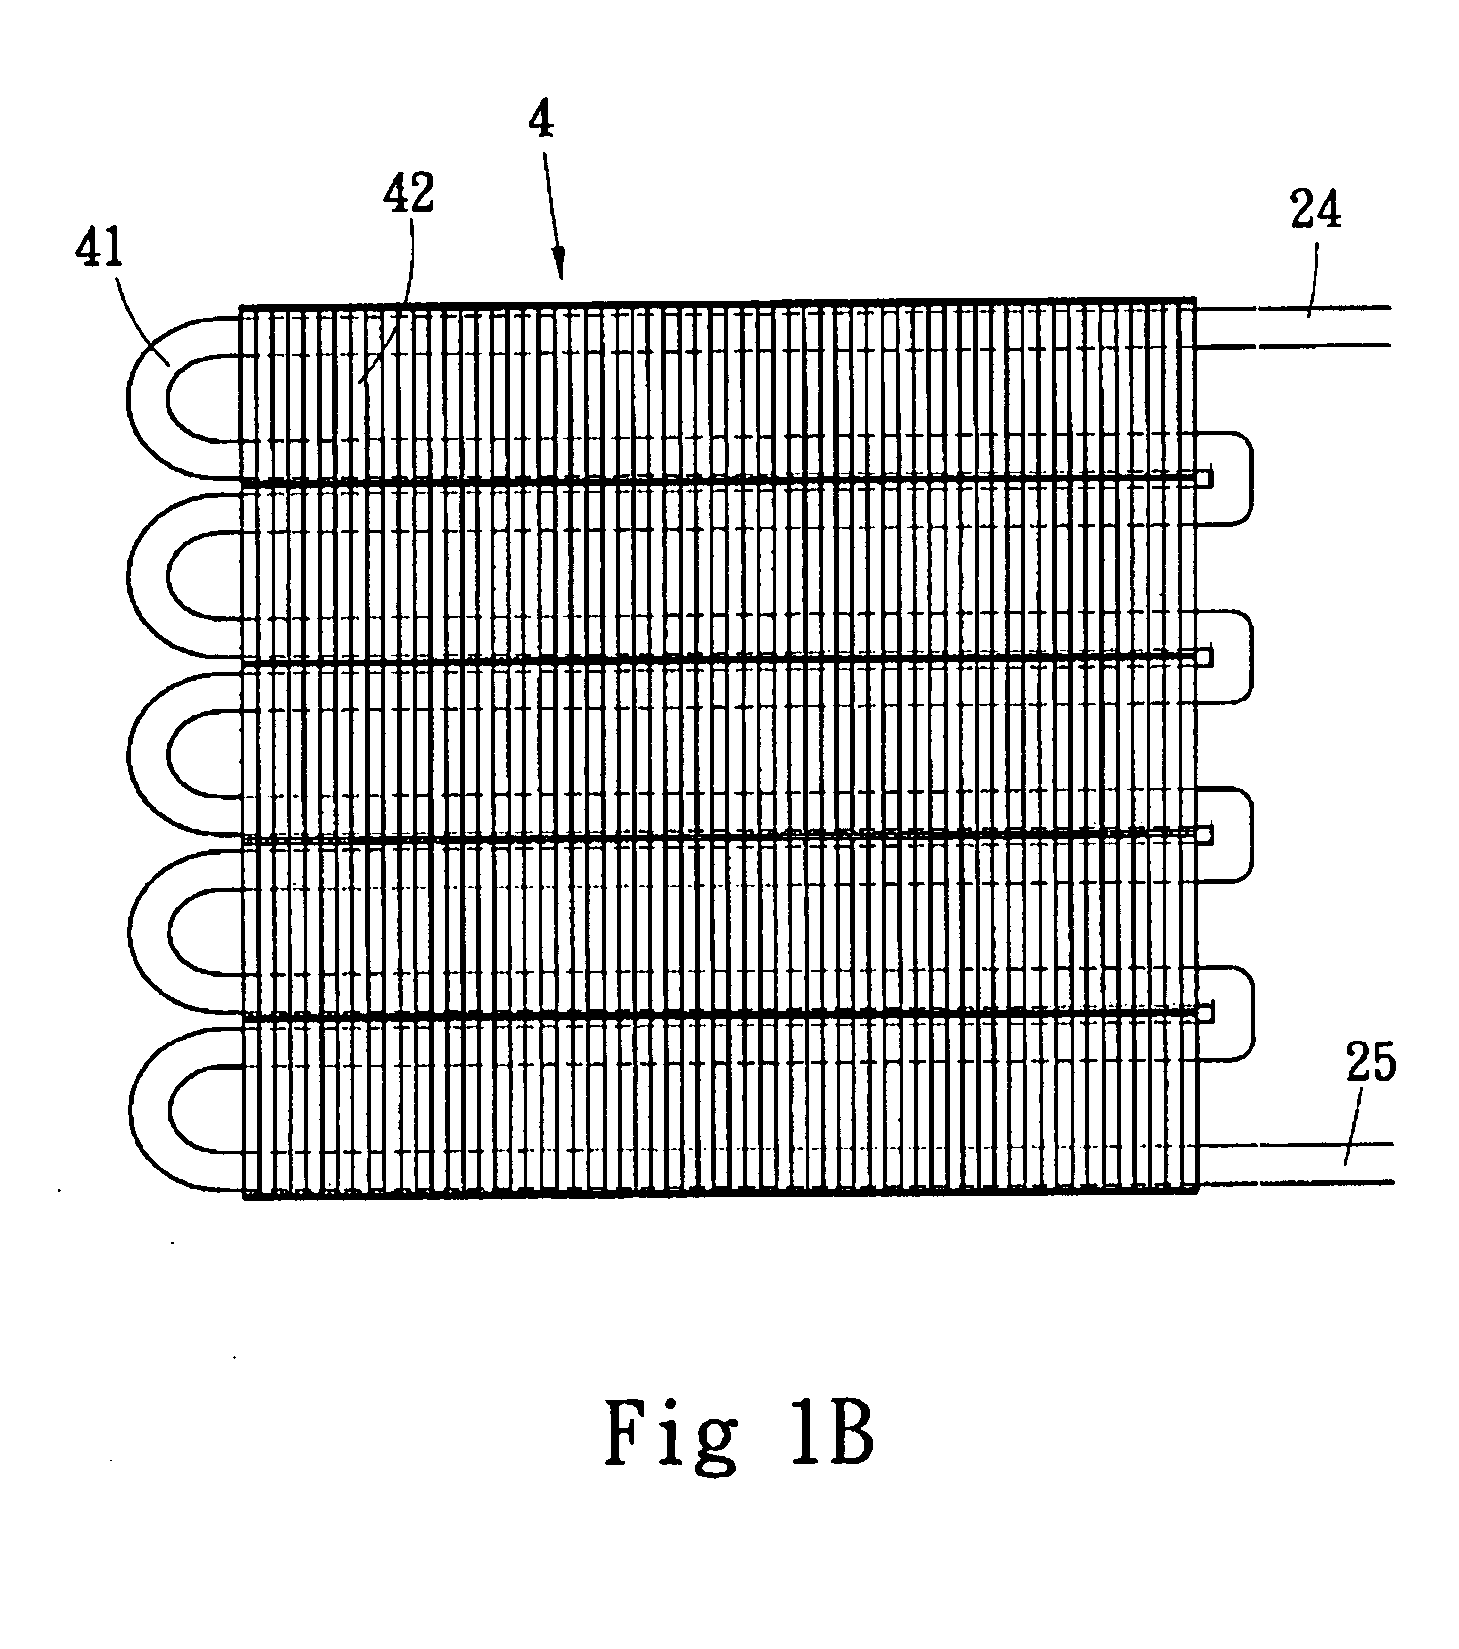 Structure of radiator